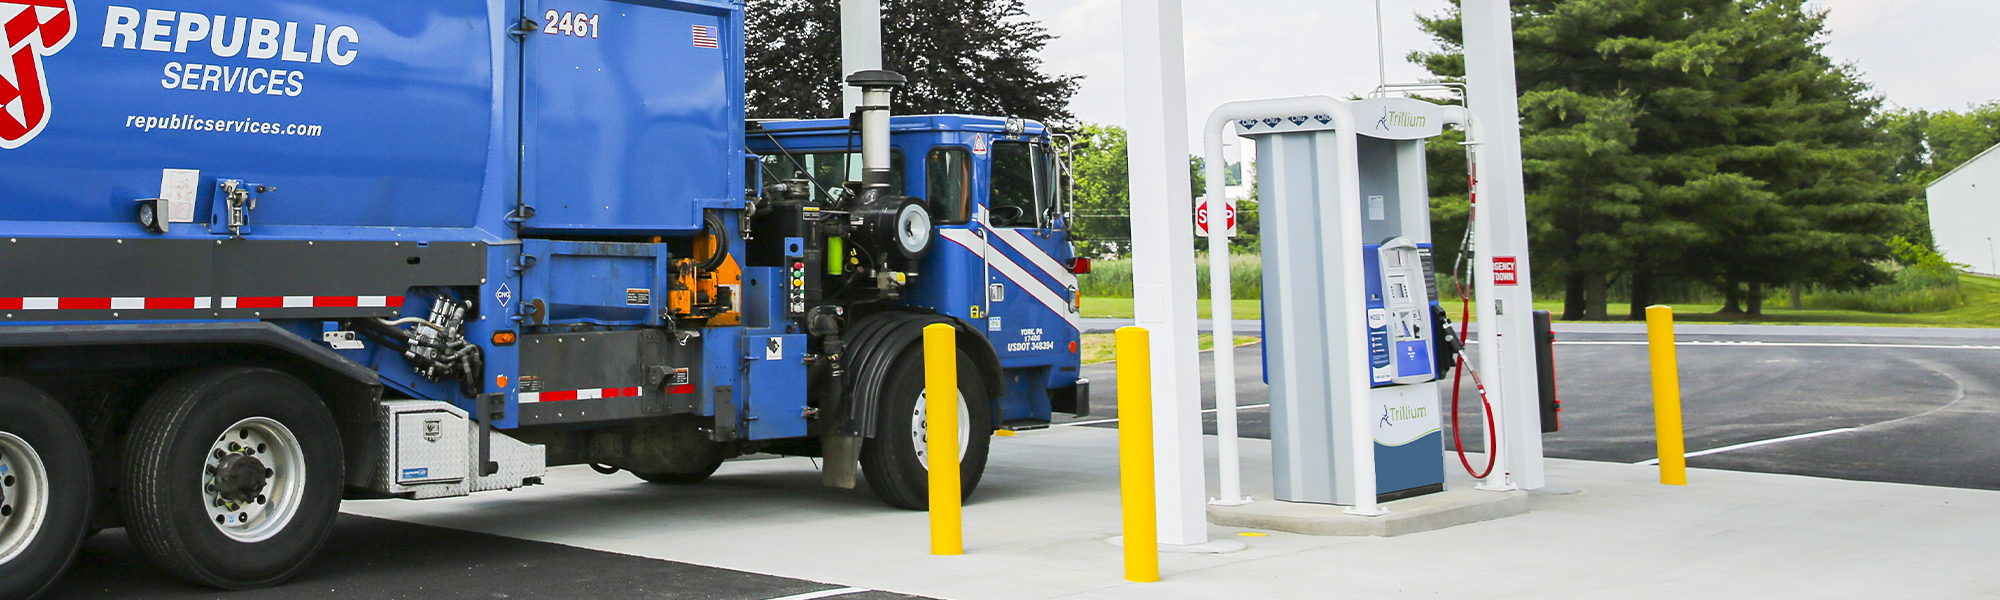 Photo of waste trucks at a Trillium station fueling